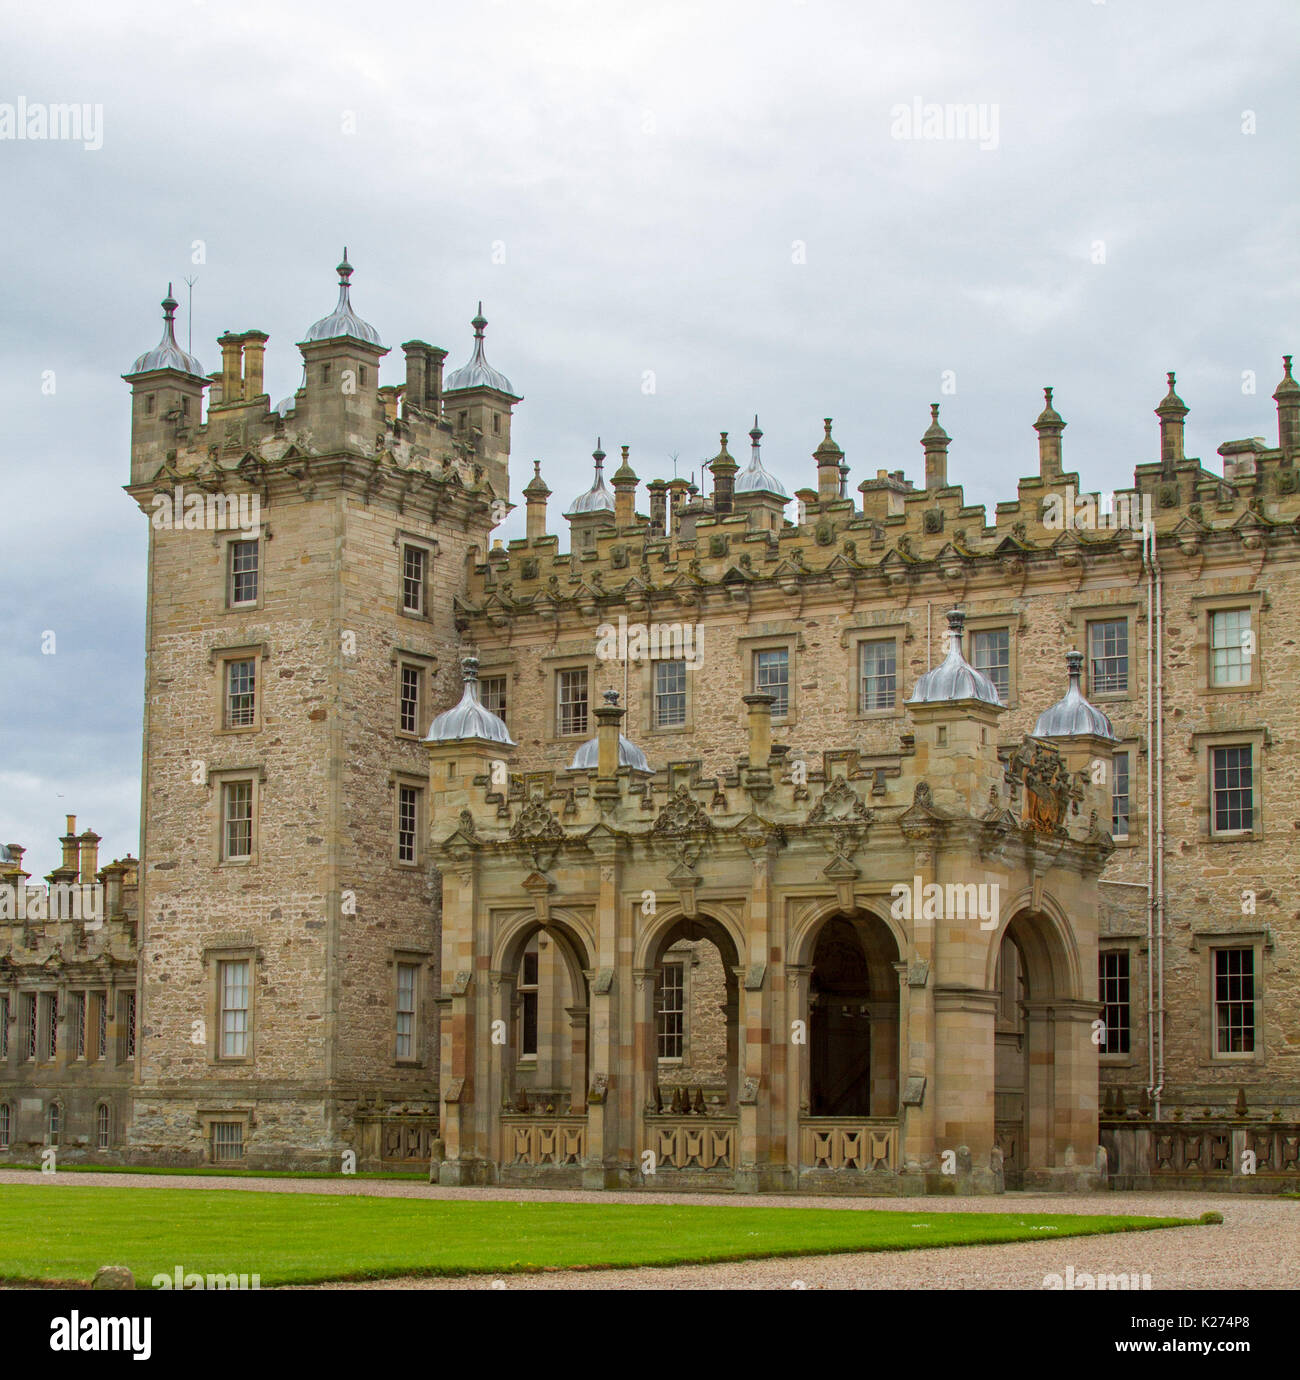 Front entrance of Floors castle, 18th century stately home in Kelso, Roxburghshire, Scotland Stock Photo